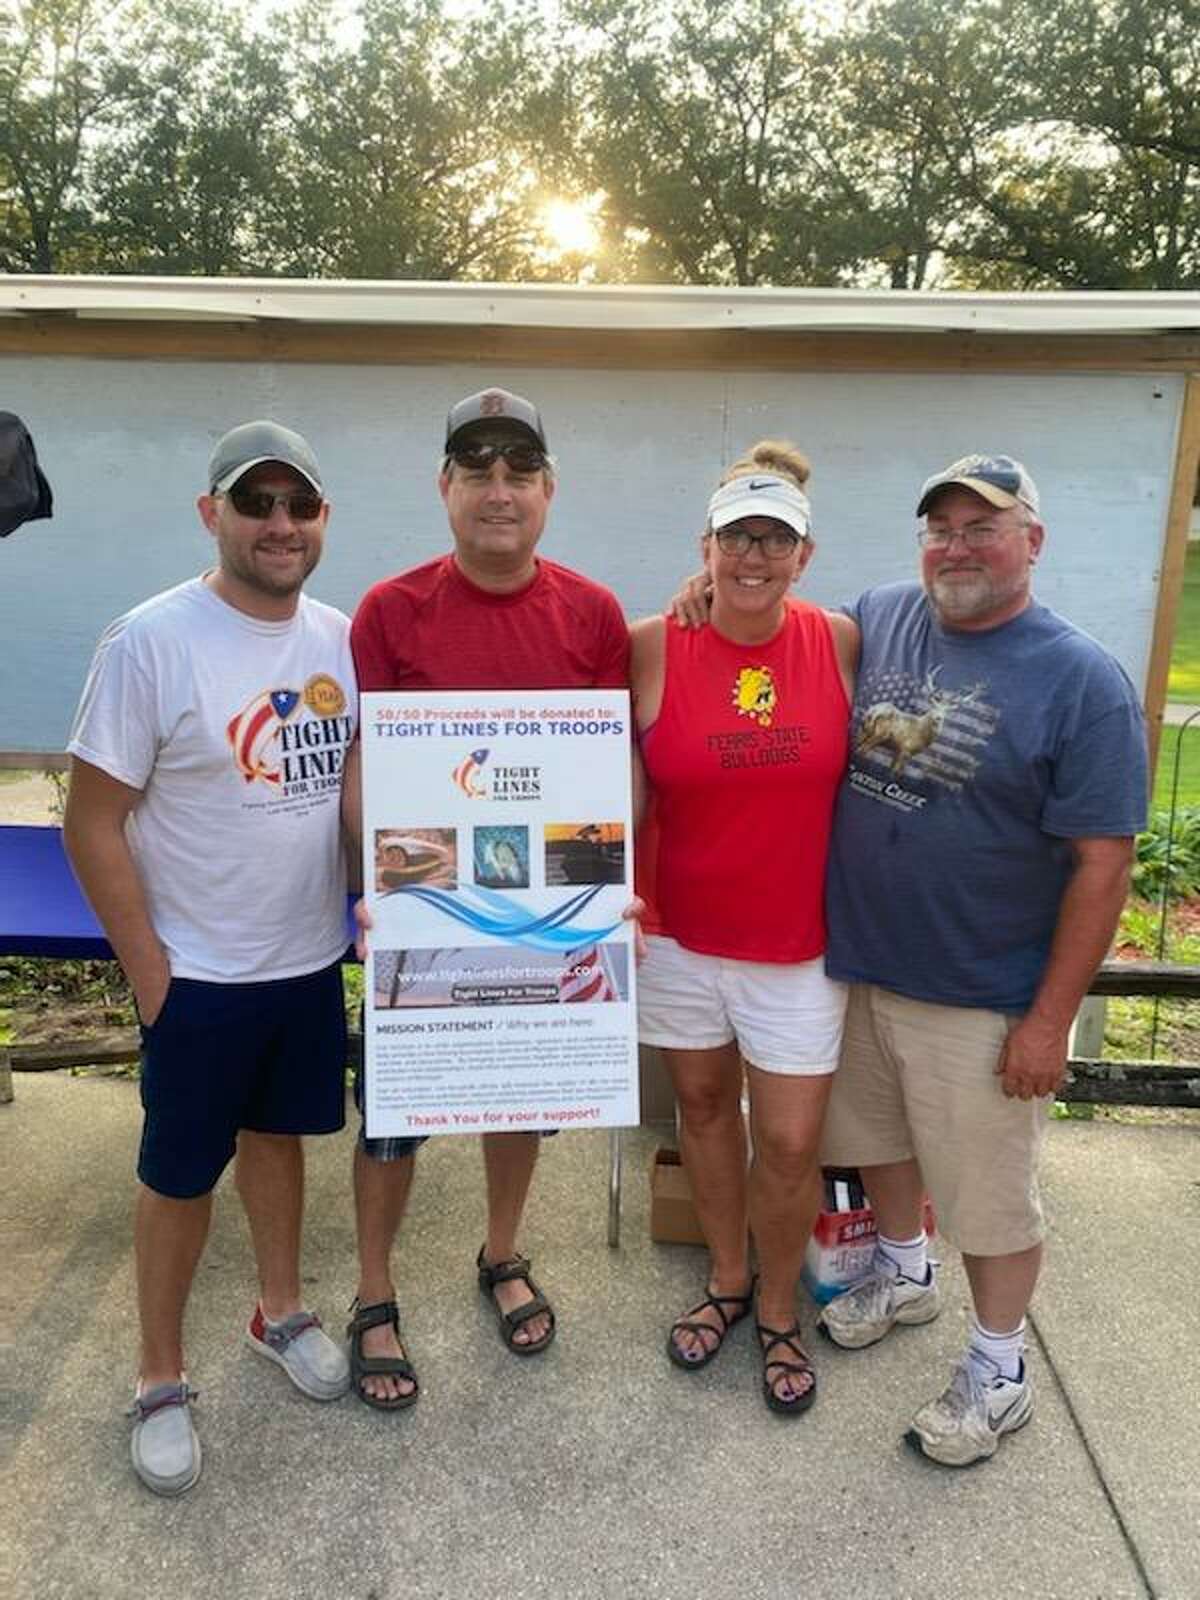 Osceola County business owners (left to right) Eric Rasmussen, Brian Rasmussen, Sheri Edstrom, and Jamie Edstrom pose for a photo during a golf tournament hosted by Ashton General Store and Sunny’s Bar and Grill in September.